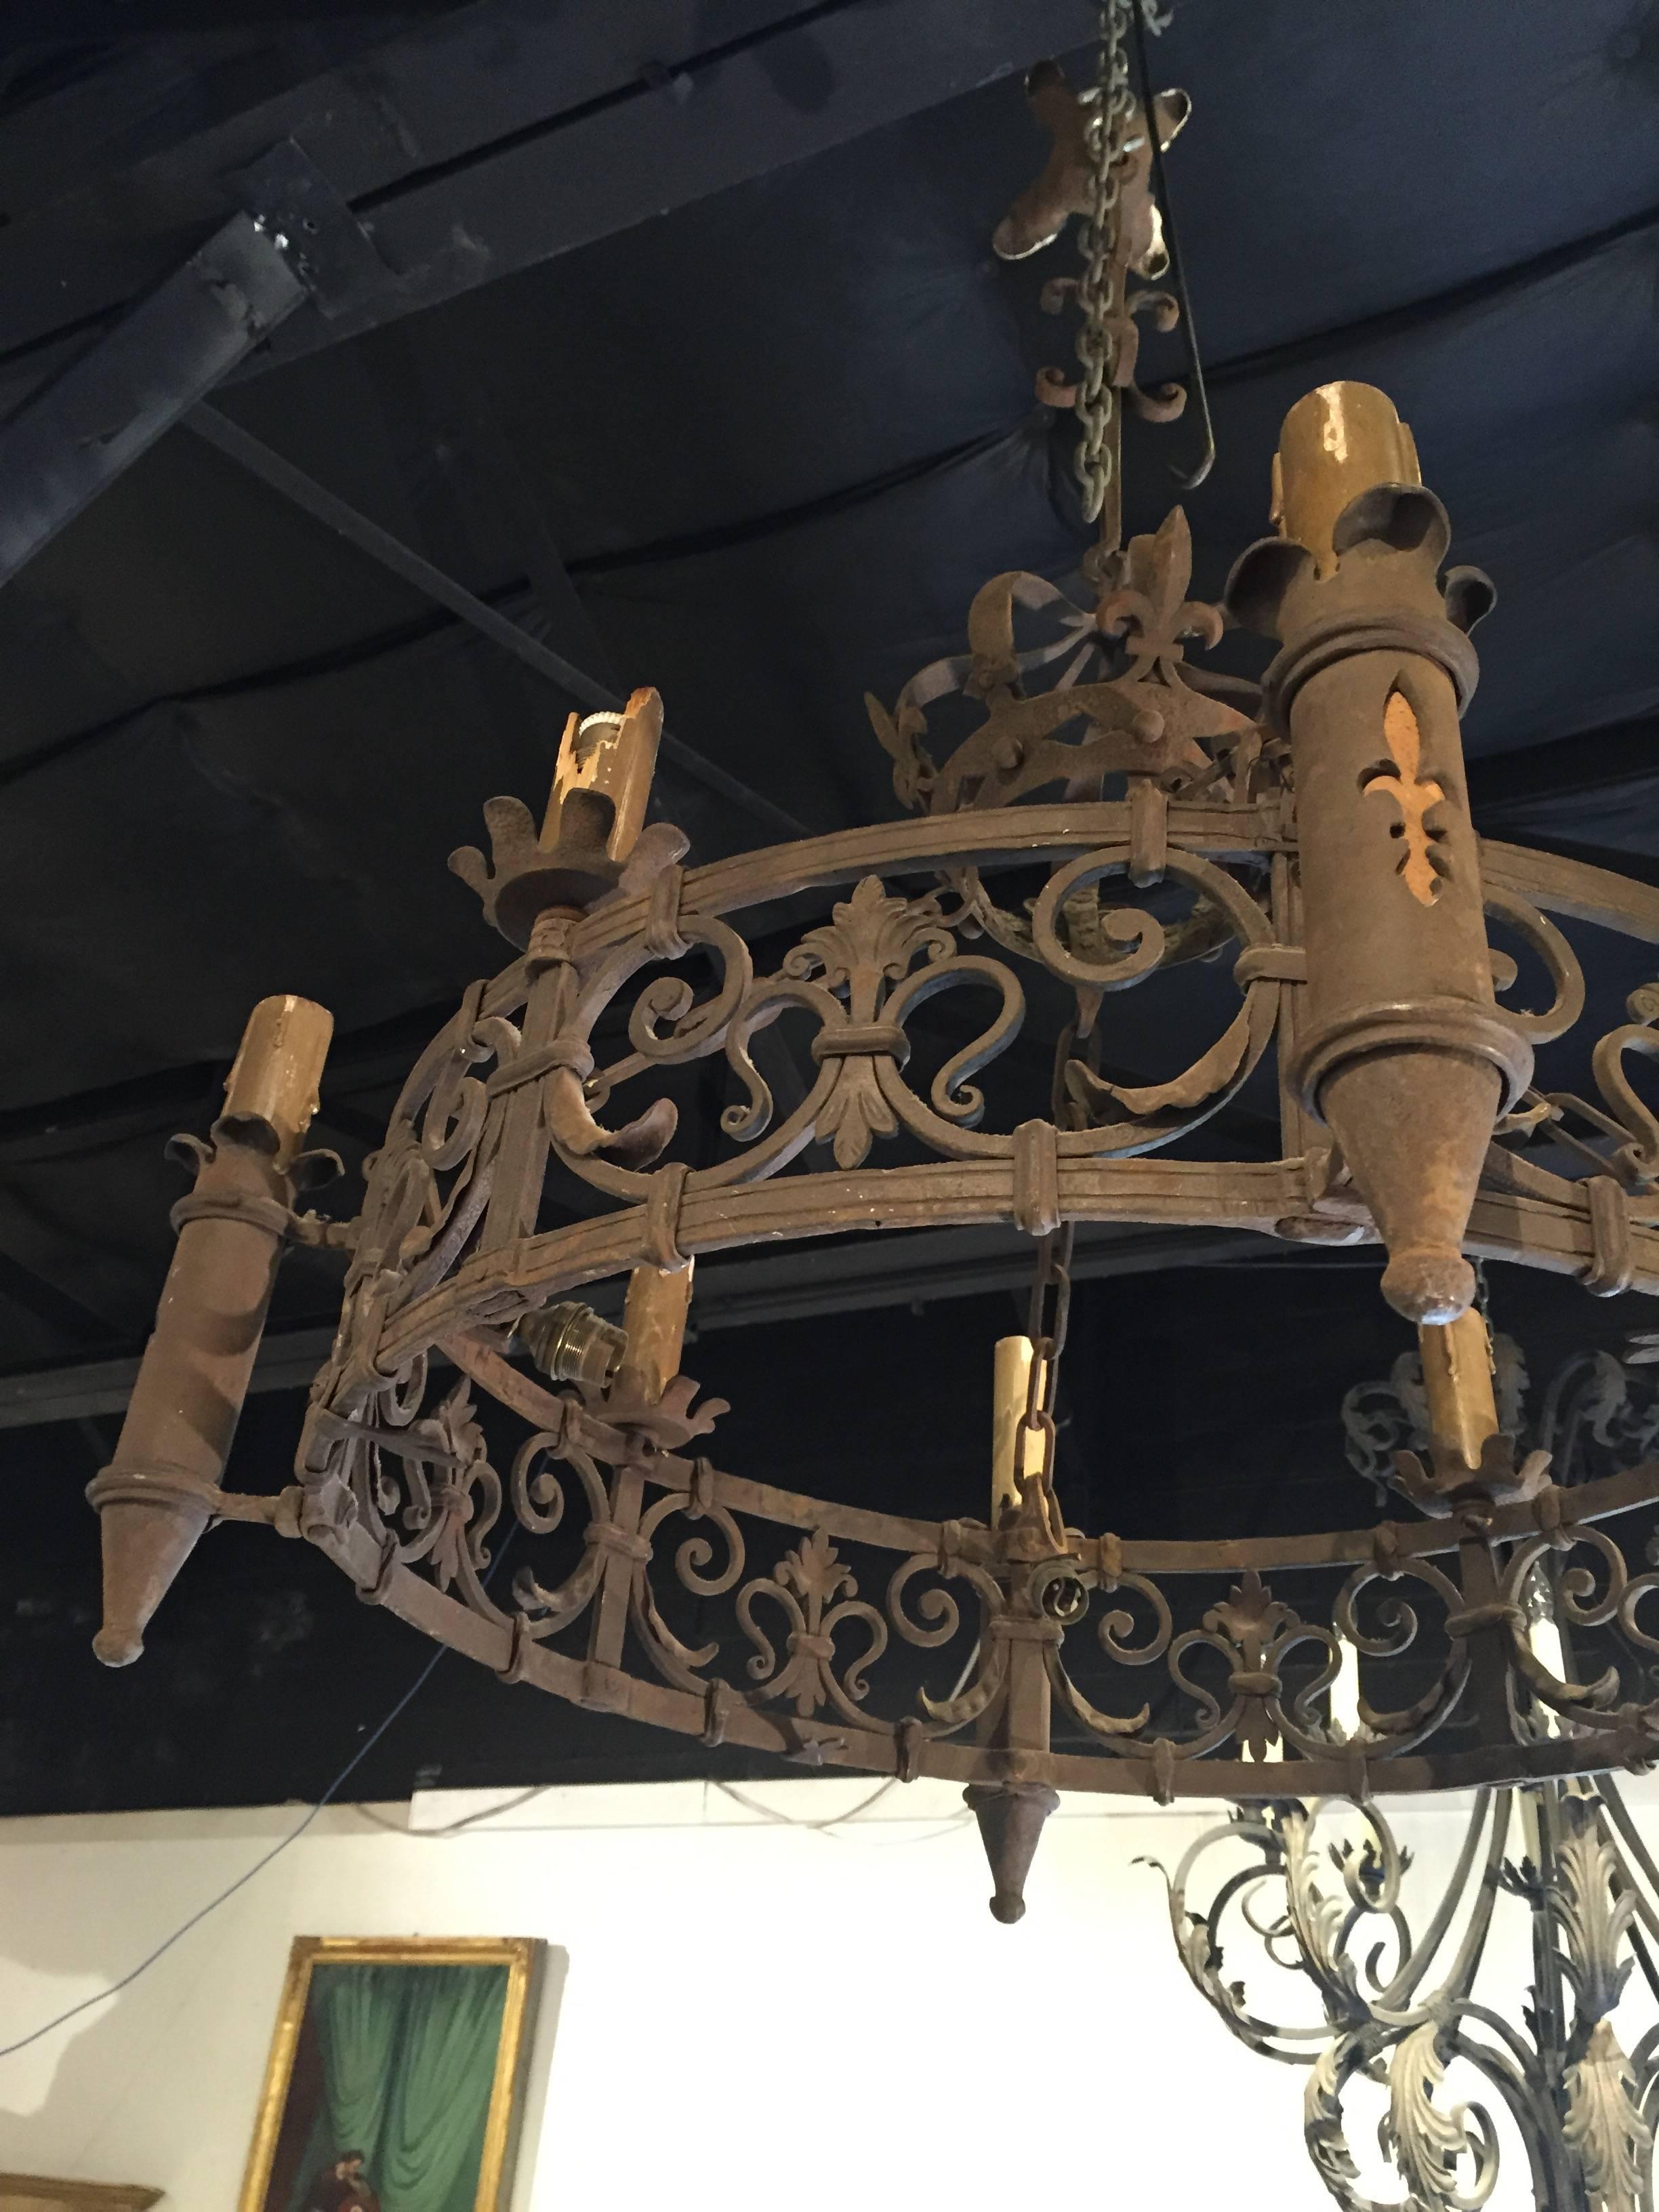 The variety of stylized fleur de lys on this circular, forged iron chandelier from France displays the artistry of its designer. The canopy is an open worked stylized crown, interspersed with fleur de lys around the banded area.  The tall circular